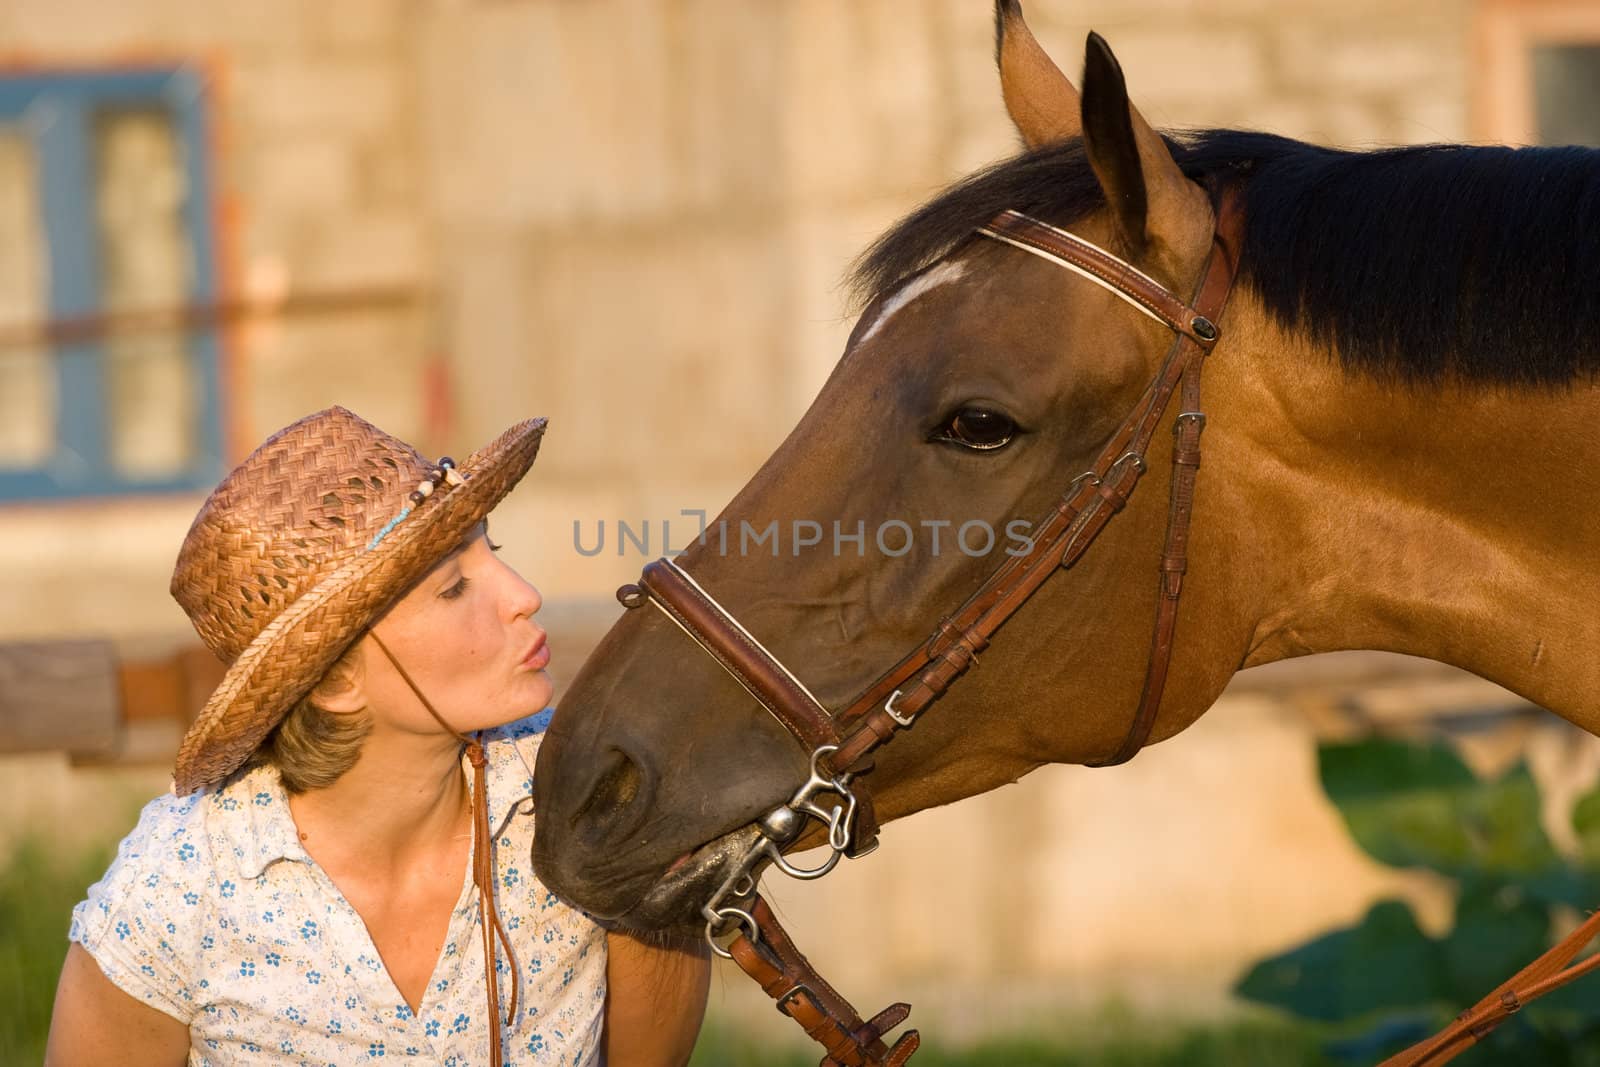 Woman in hat kissing brown horse